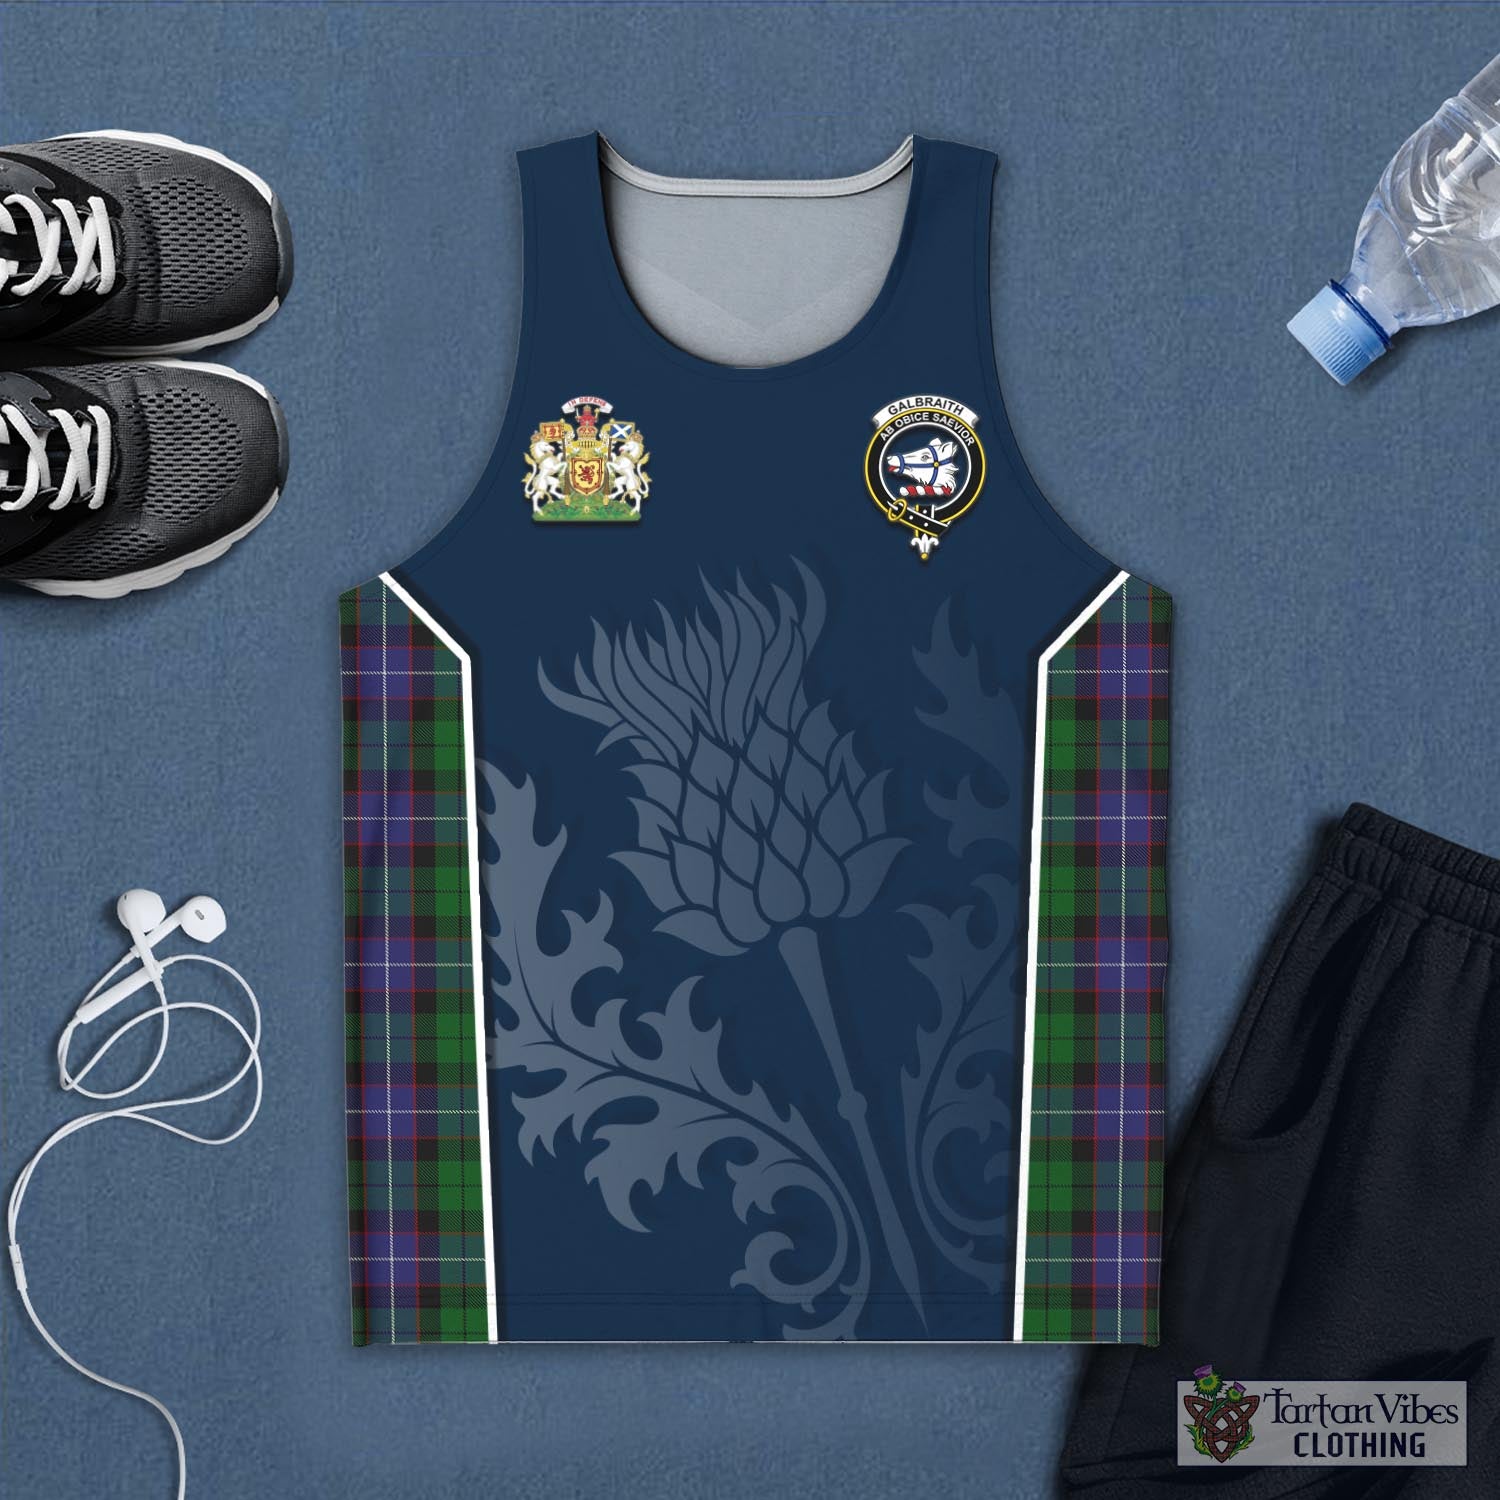 Tartan Vibes Clothing Galbraith Tartan Men's Tanks Top with Family Crest and Scottish Thistle Vibes Sport Style